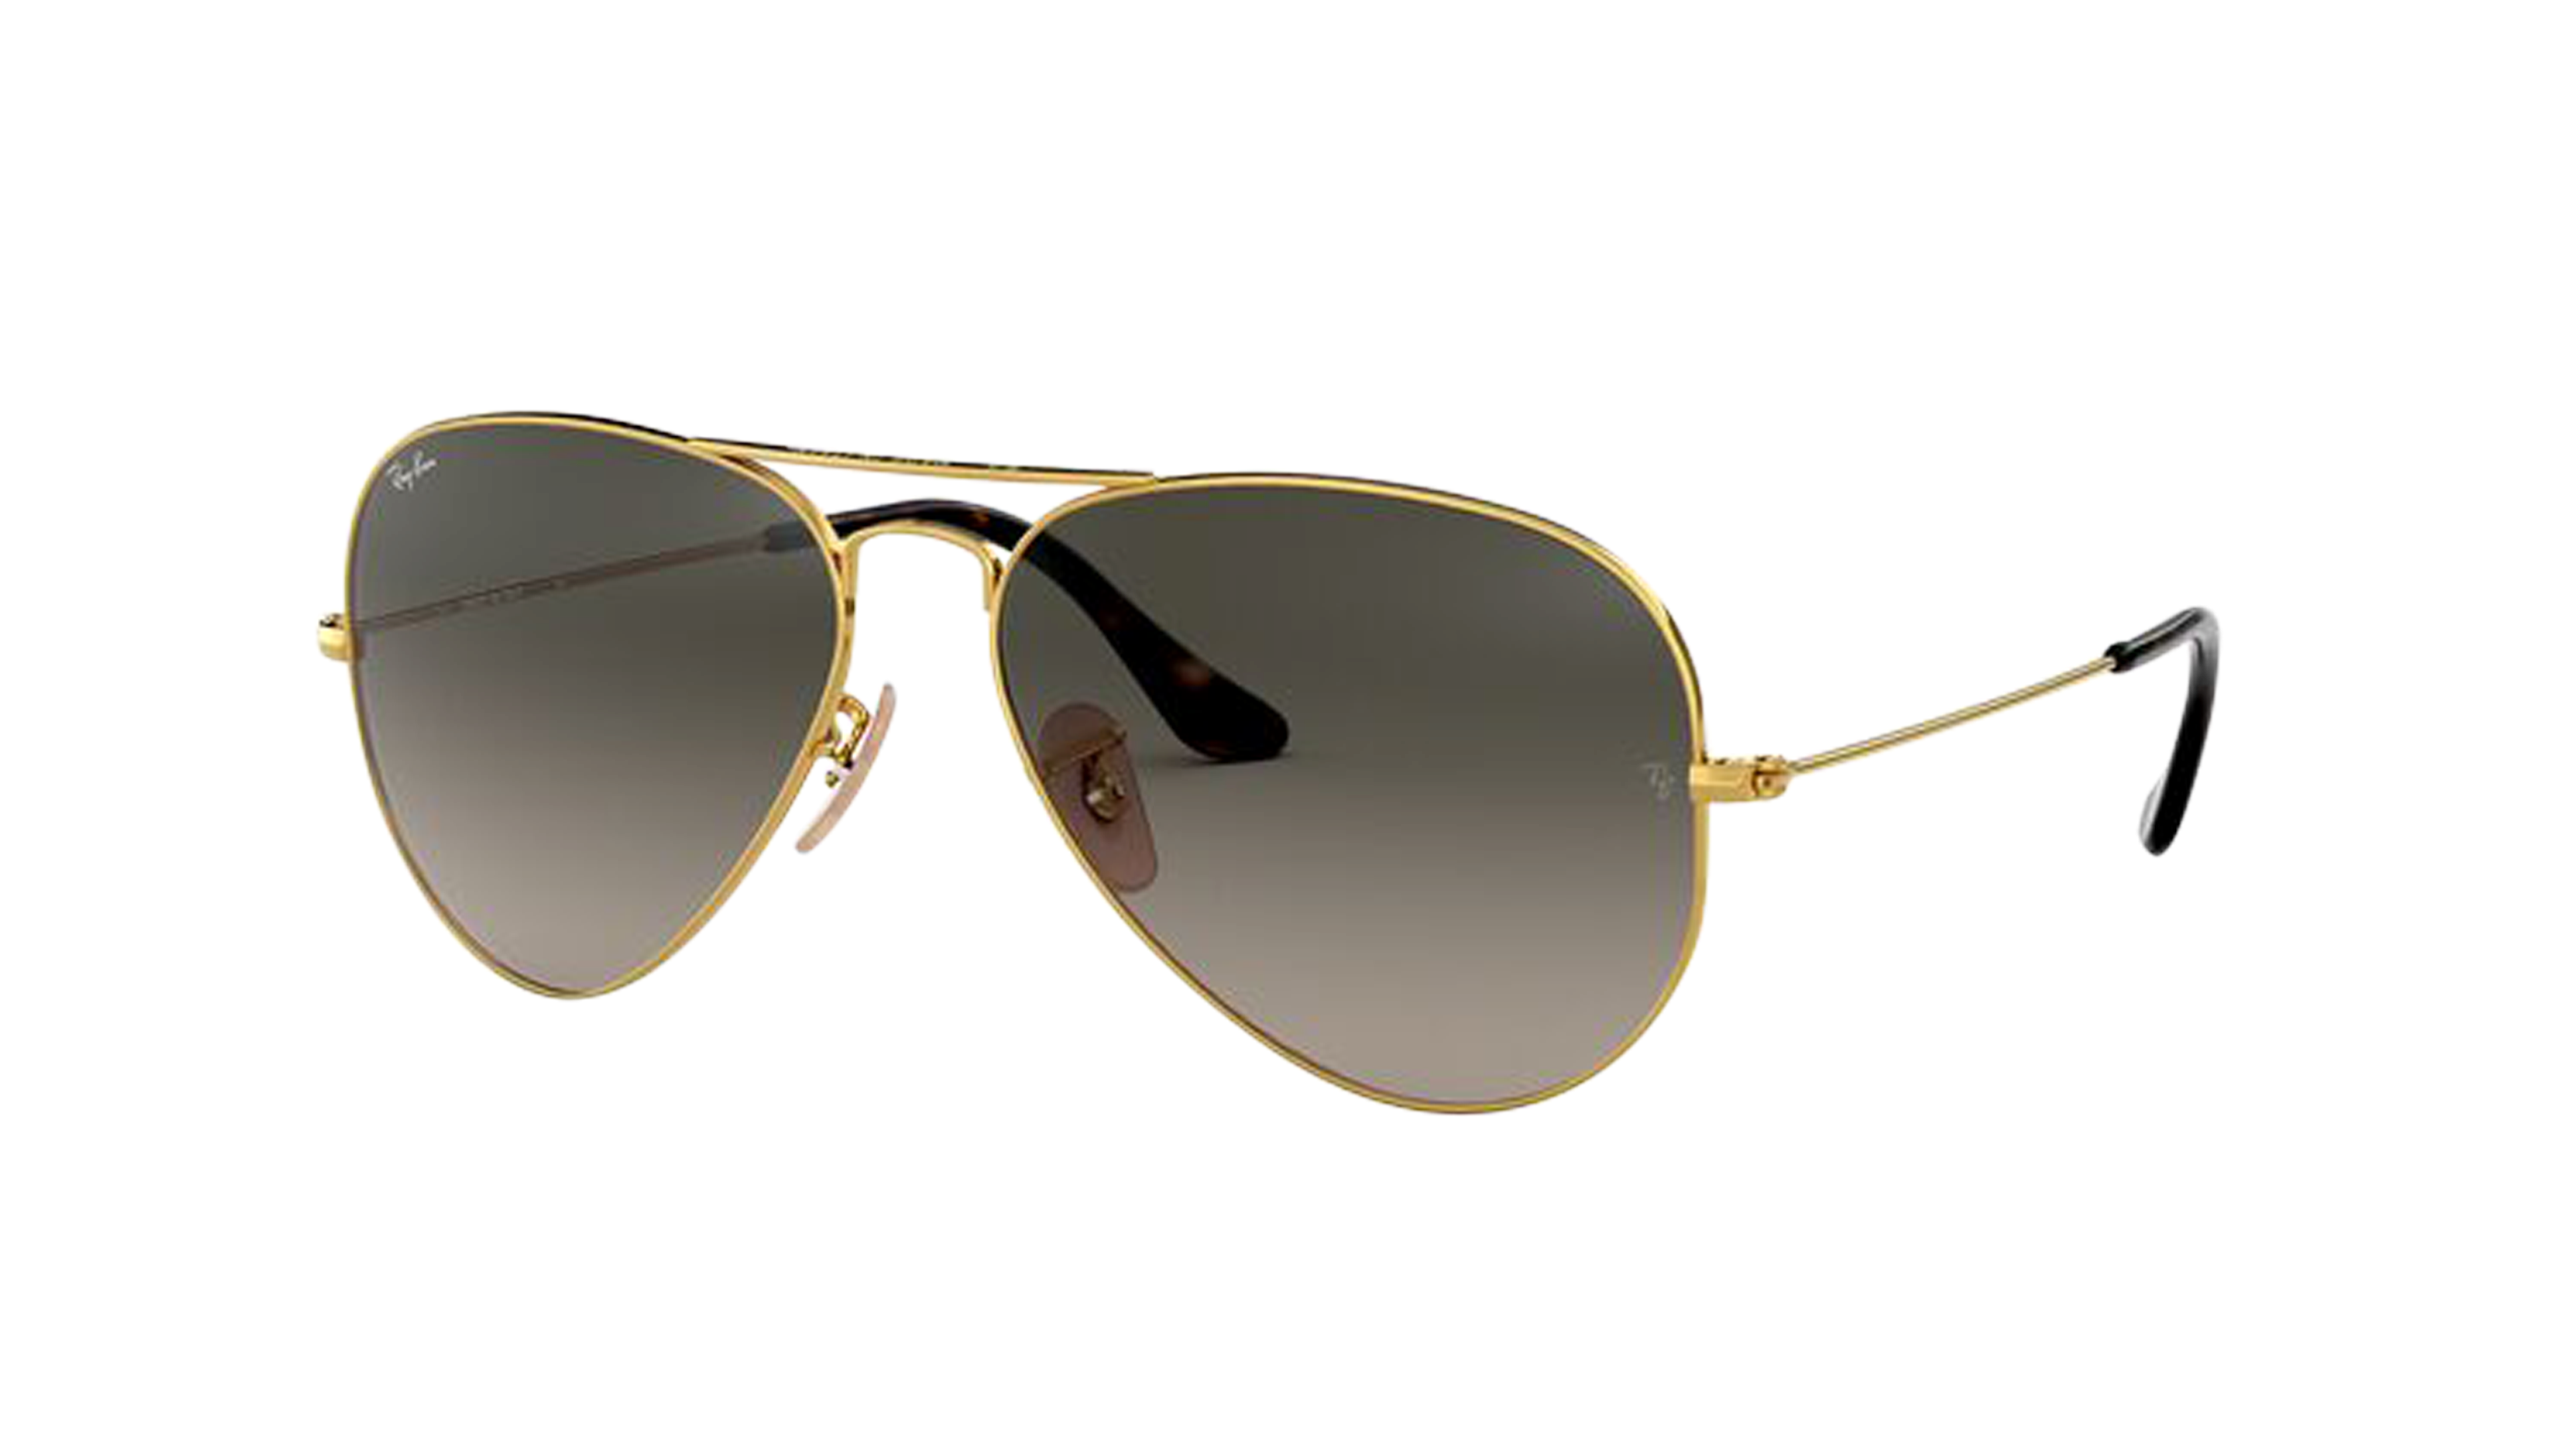 [products.image.angle_left01] RAY-BAN RB3025 181/71